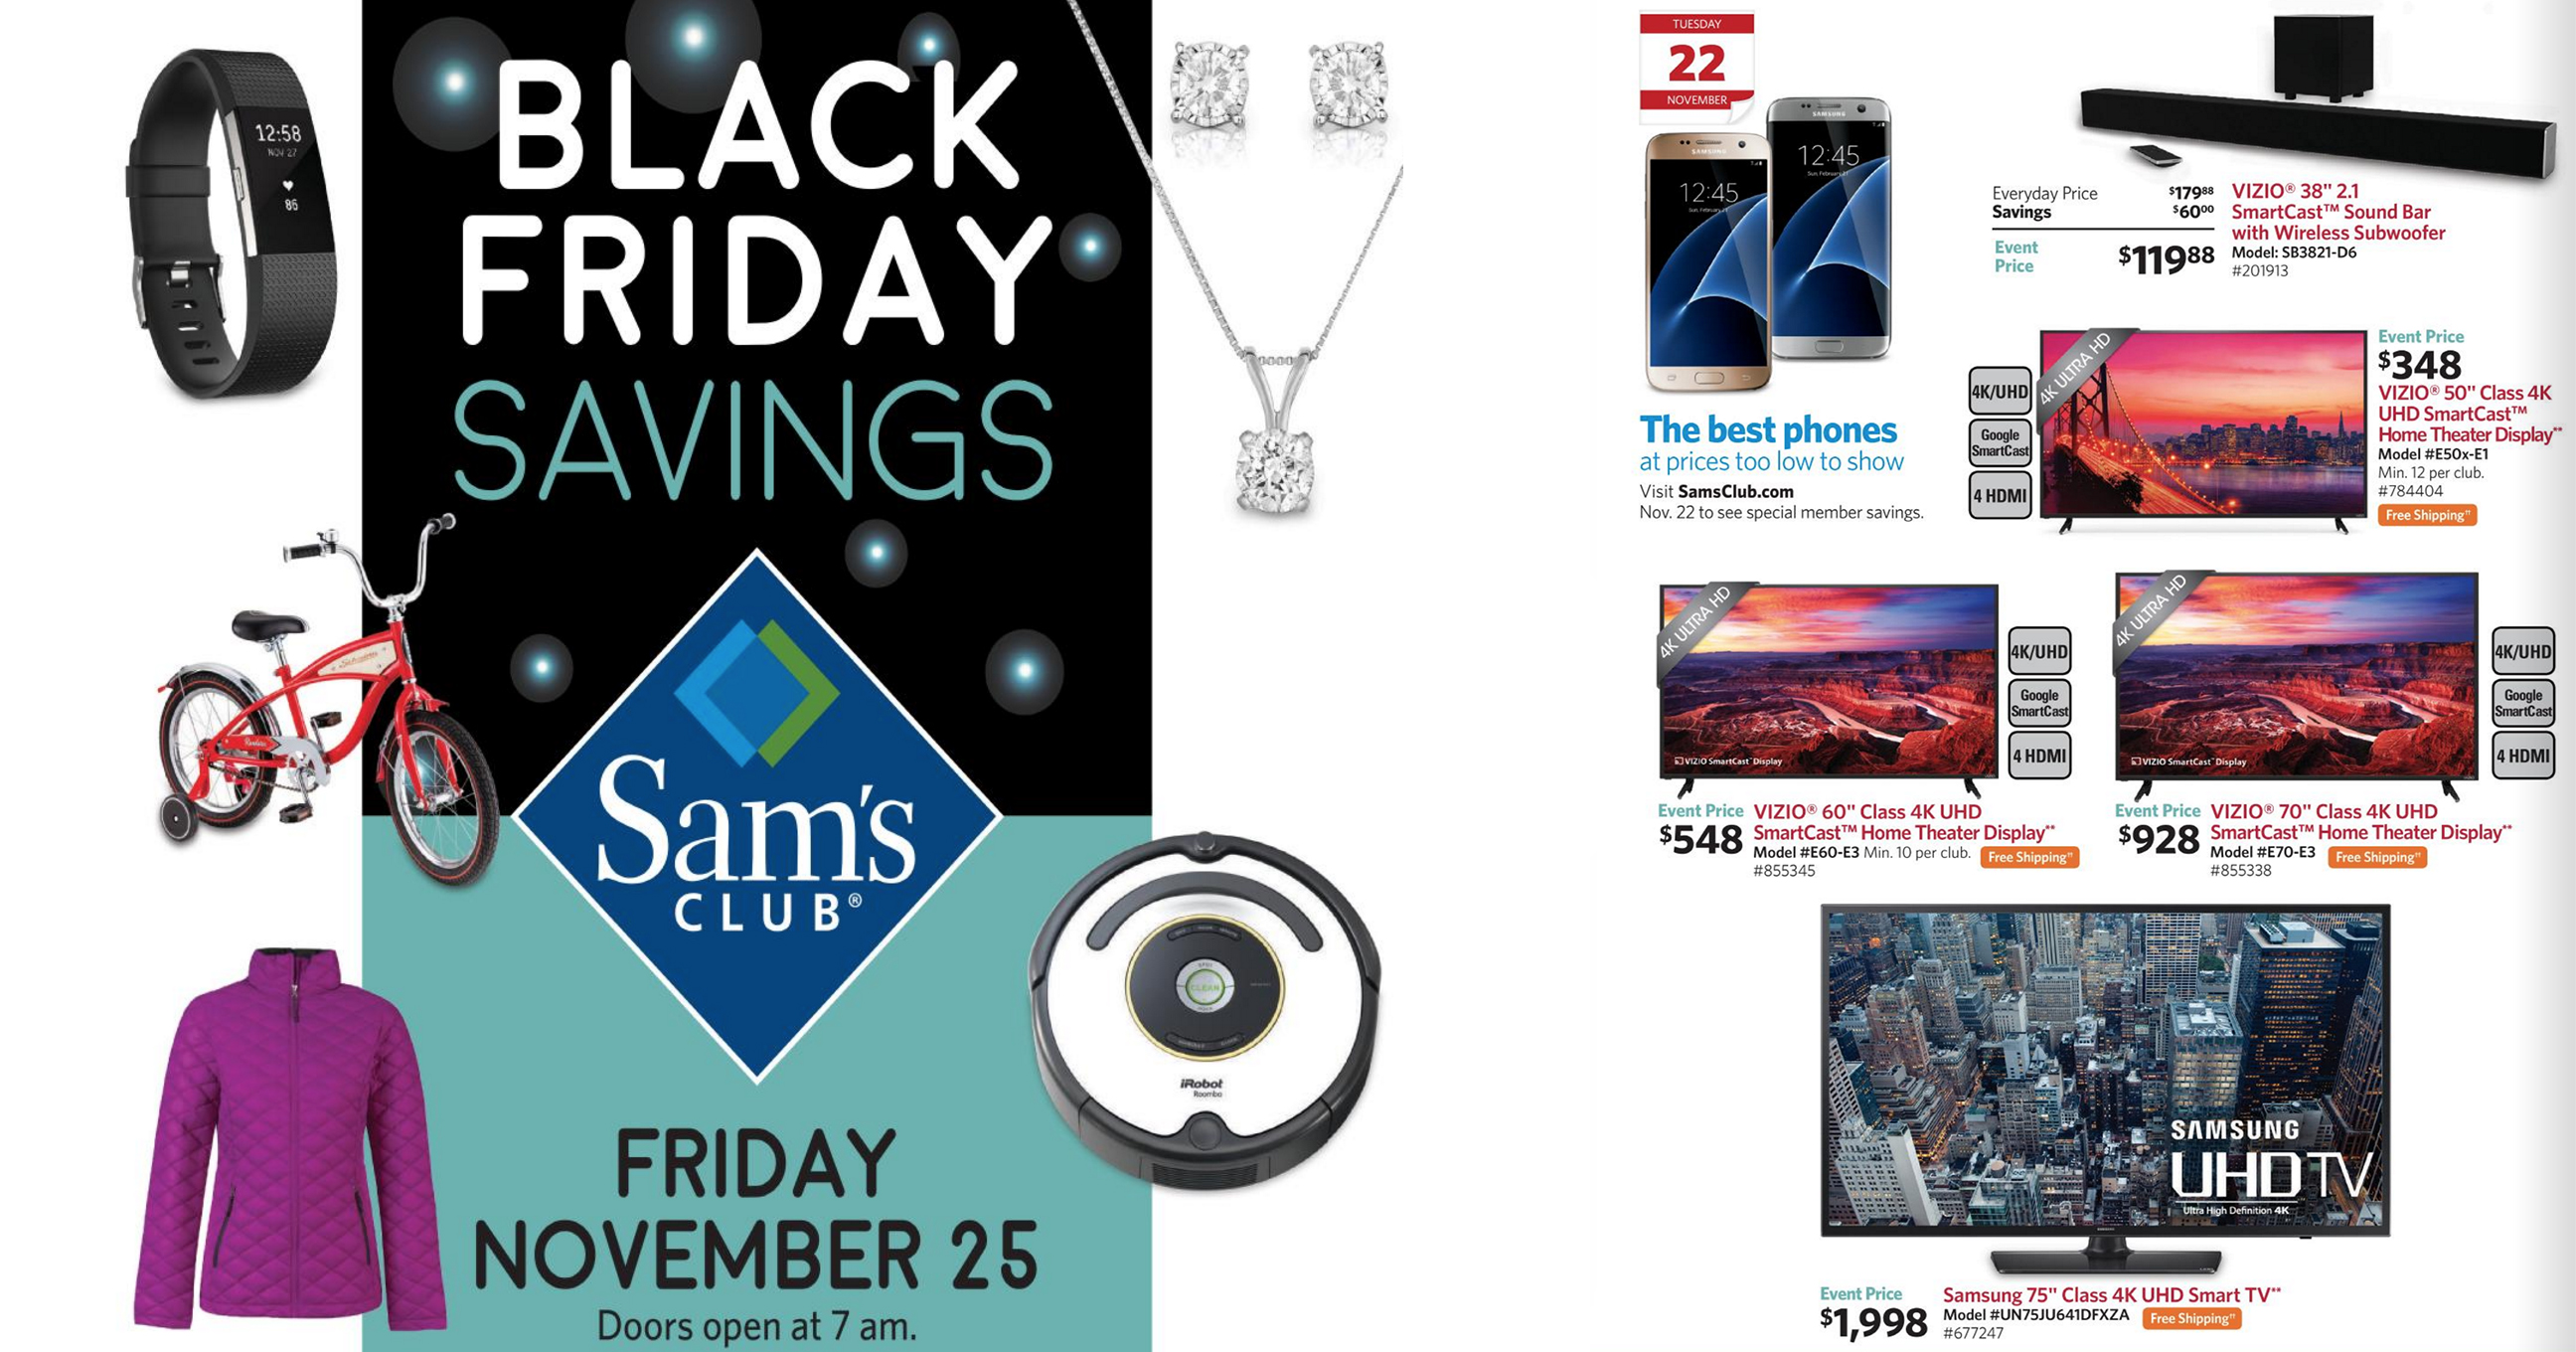 Sam's Club details its Black Friday plans plus a look at an